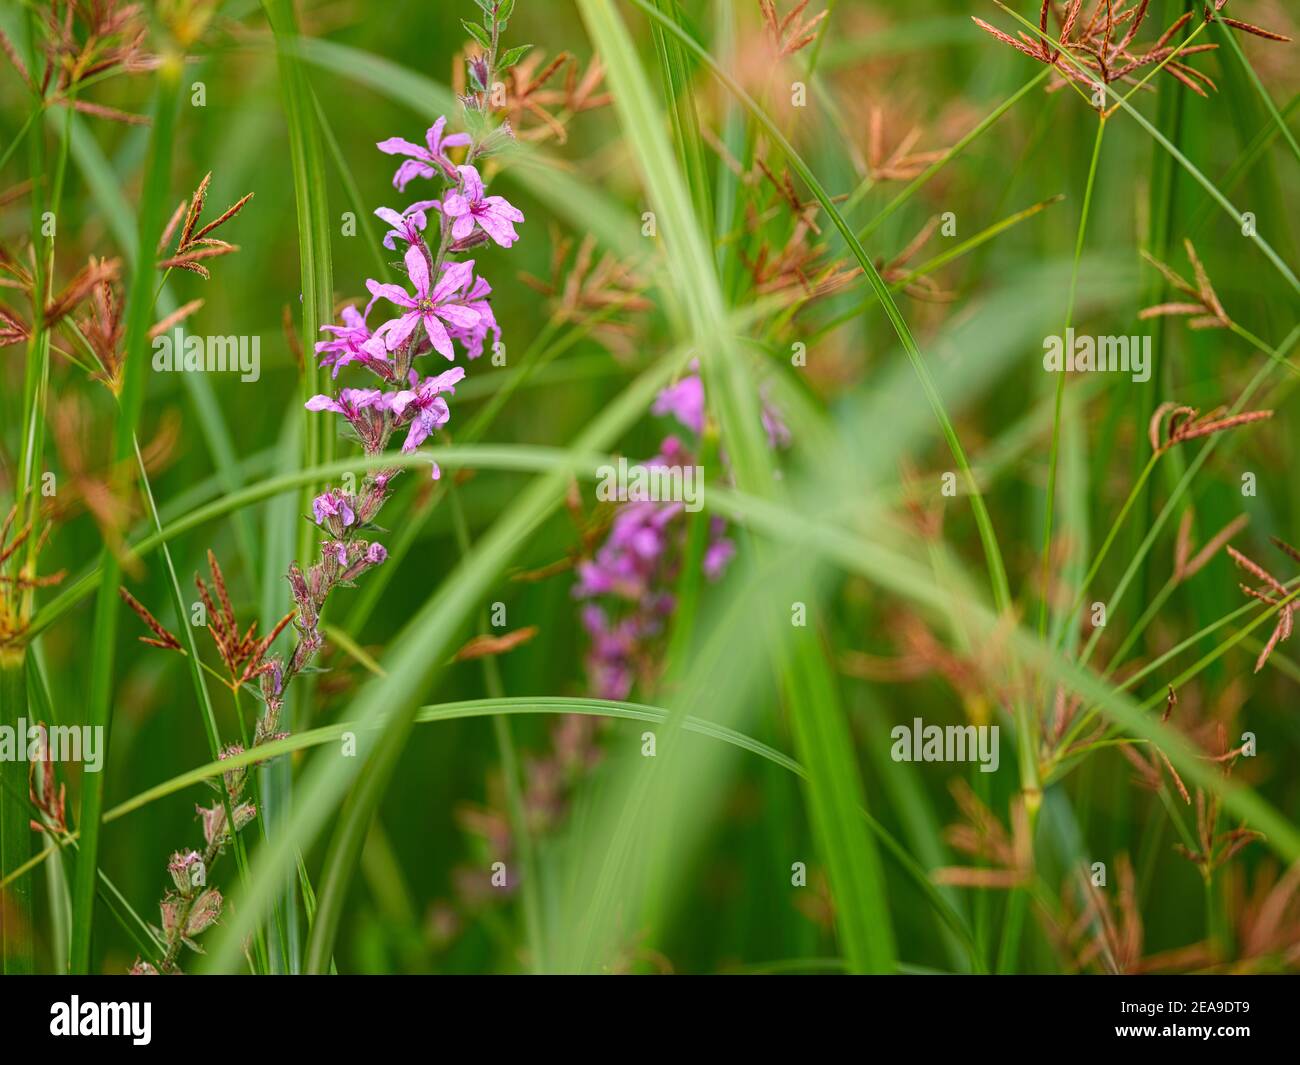 Europe, Germany, Hesse, Marburg, Botanical Garden of the Philipps University on the Lahn Mountains, flowers of the purple loosestrife (Lythrum salicaria) between rush grass Stock Photo